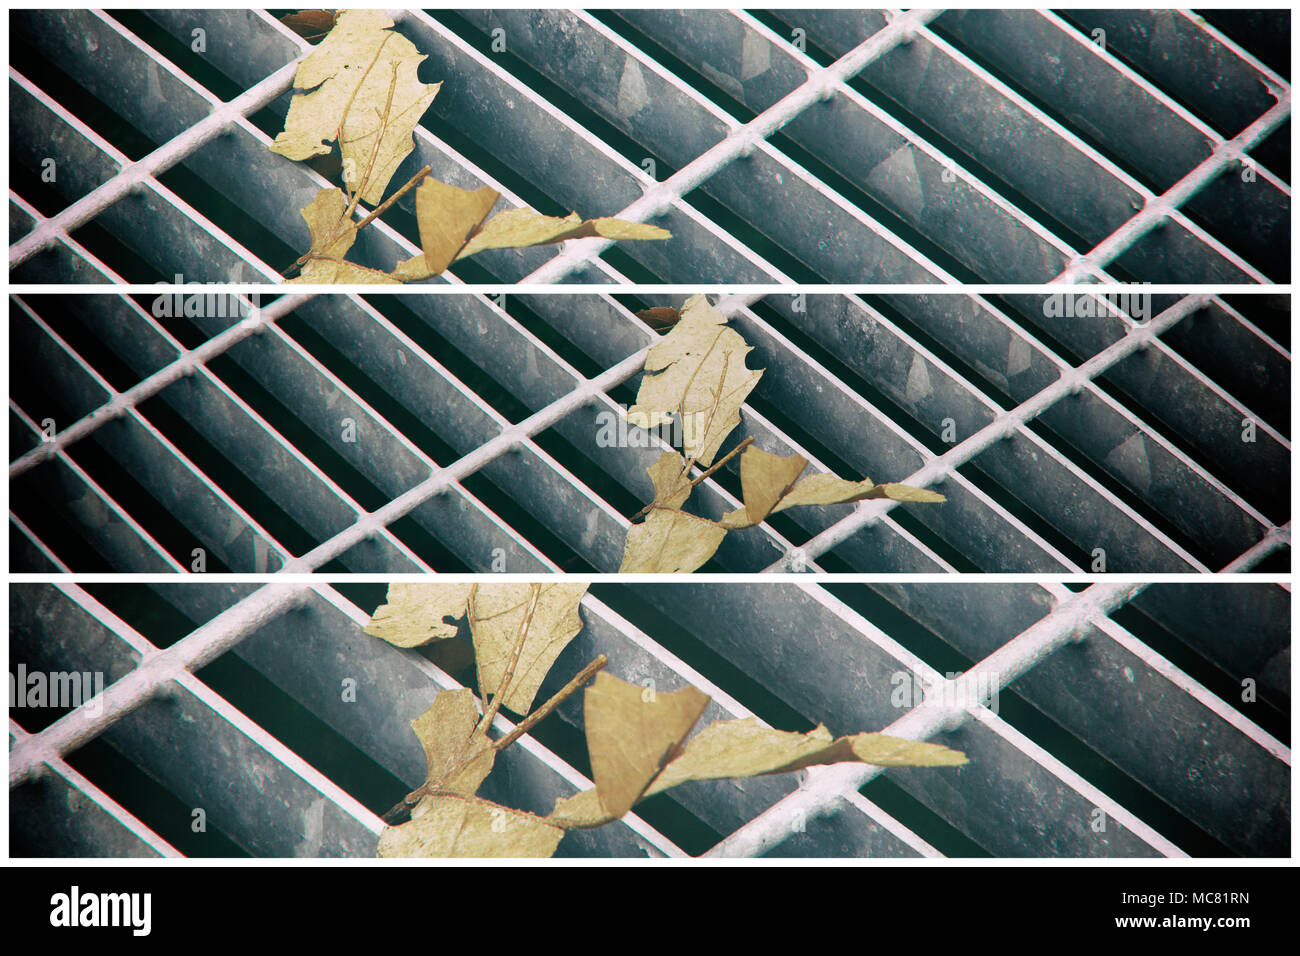 Square metal hatch in urban pavement, sewer manhole cover with marking lines and leaf inside. Stock Photo